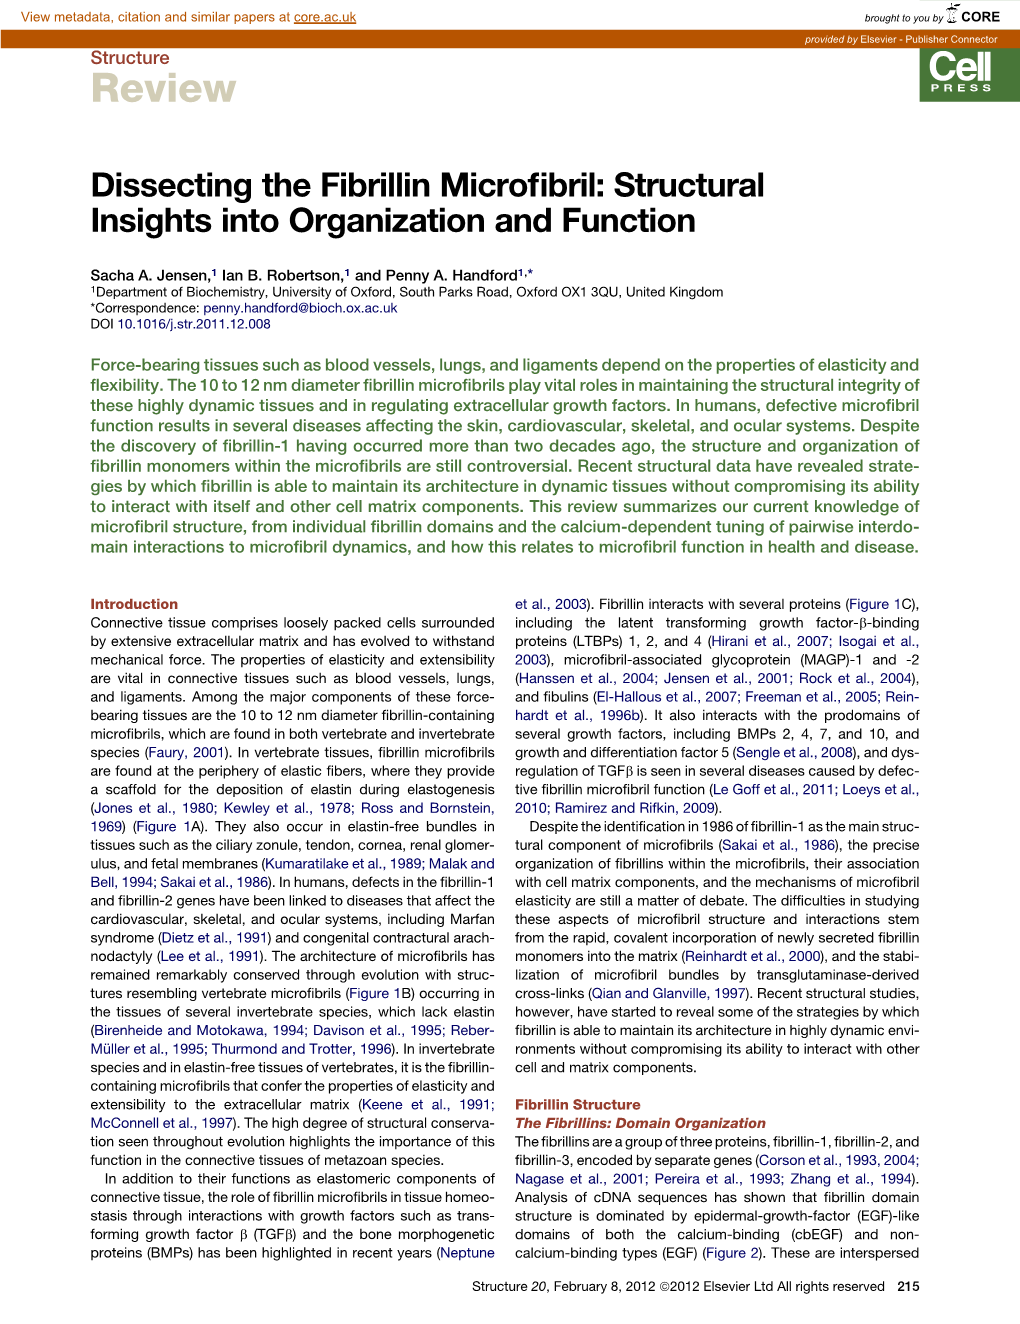 Dissecting the Fibrillin Microfibril: Structural Insights Into Organization and Function